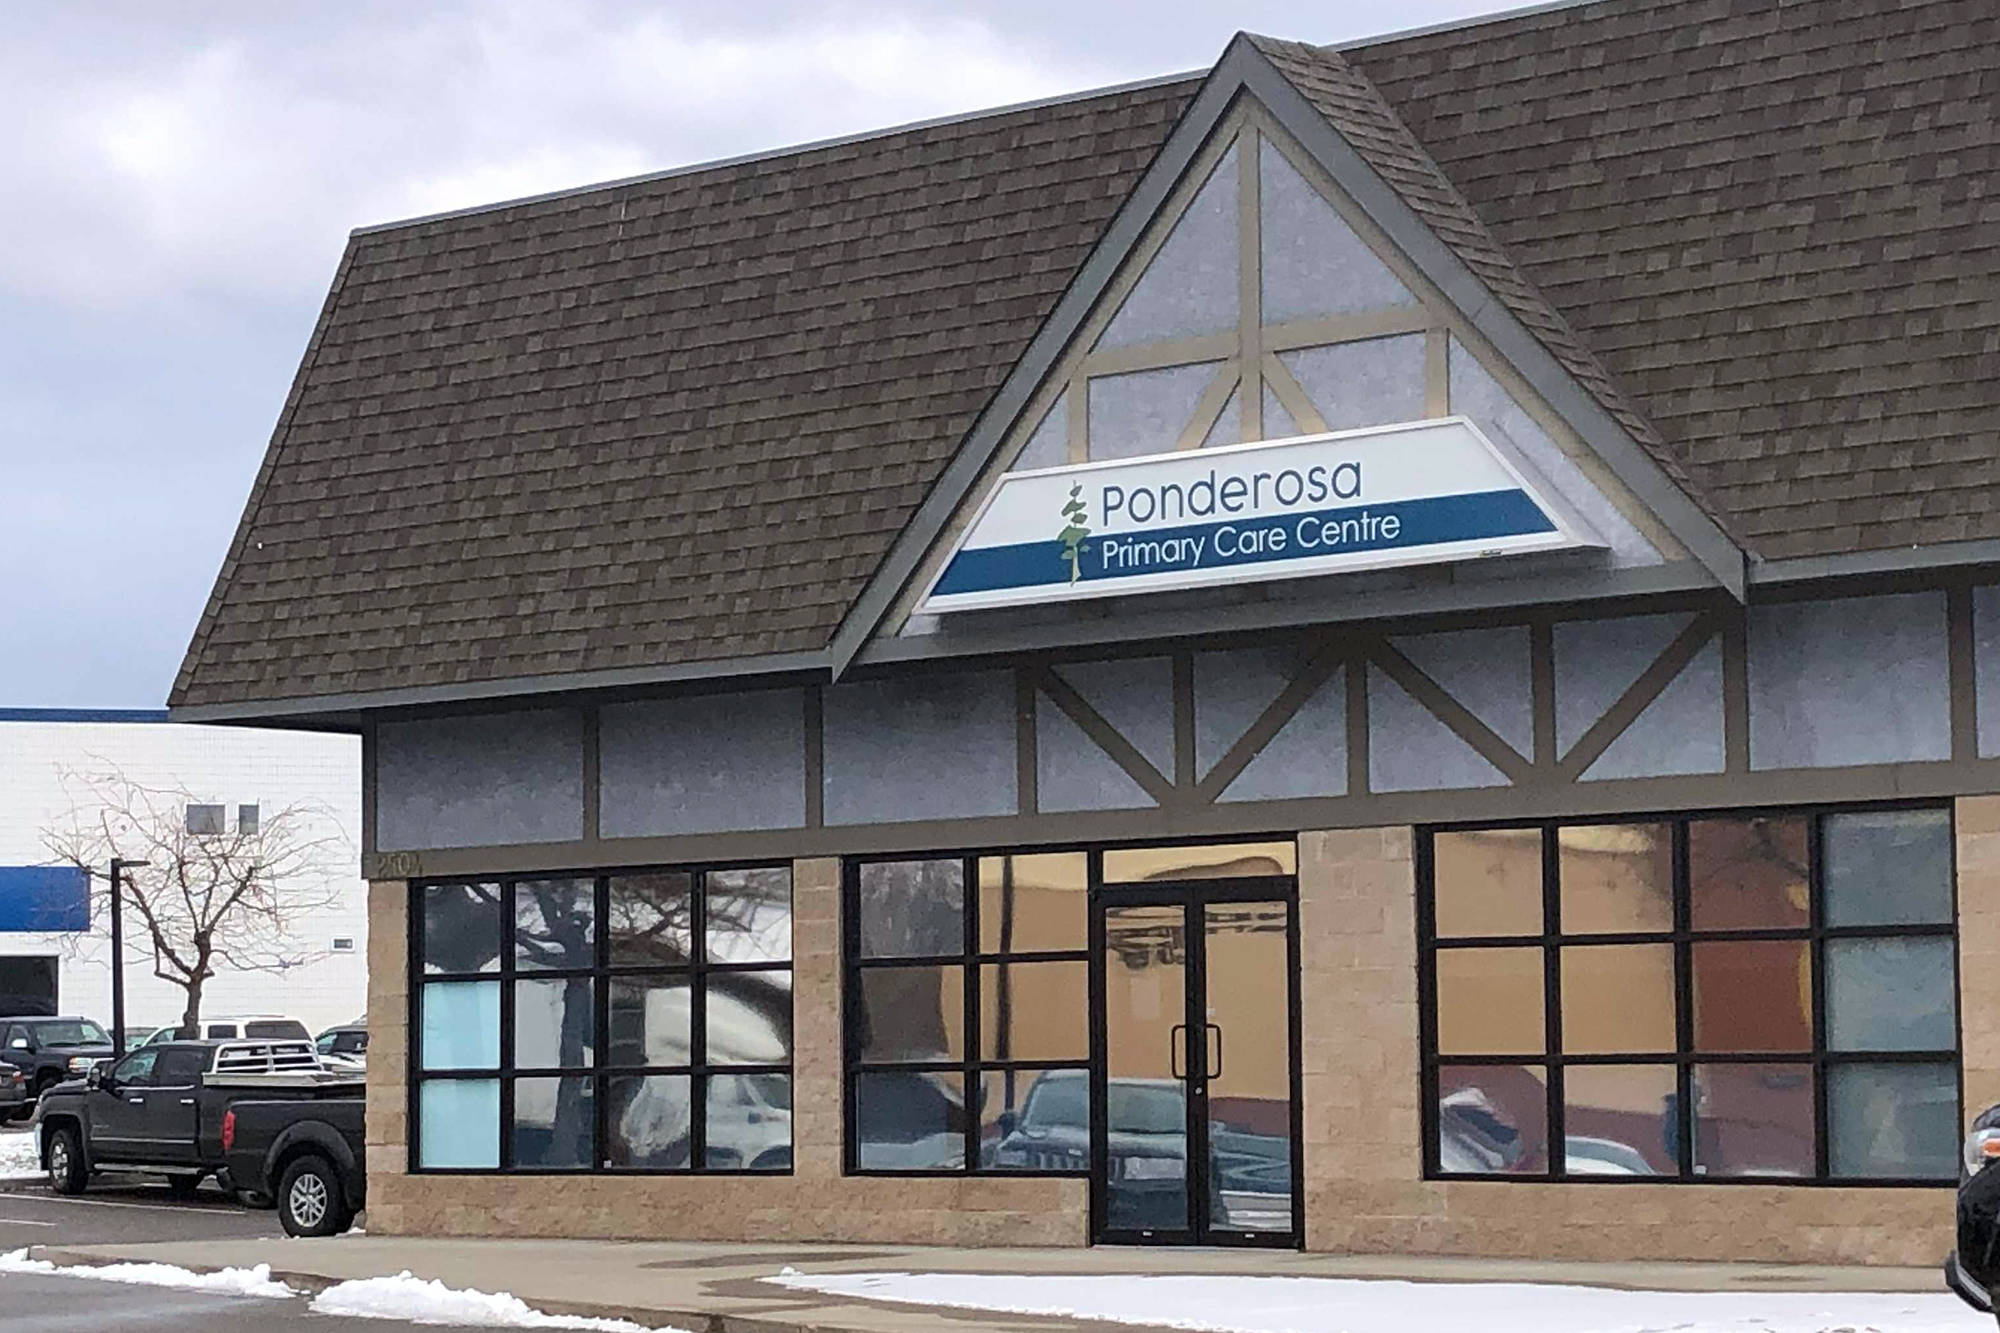 Ponderosa Primary Care Centre in Penticton is considered a model for care clinics going forward by the South Okanagan Division of Family Practice. (Monique Tamminga)